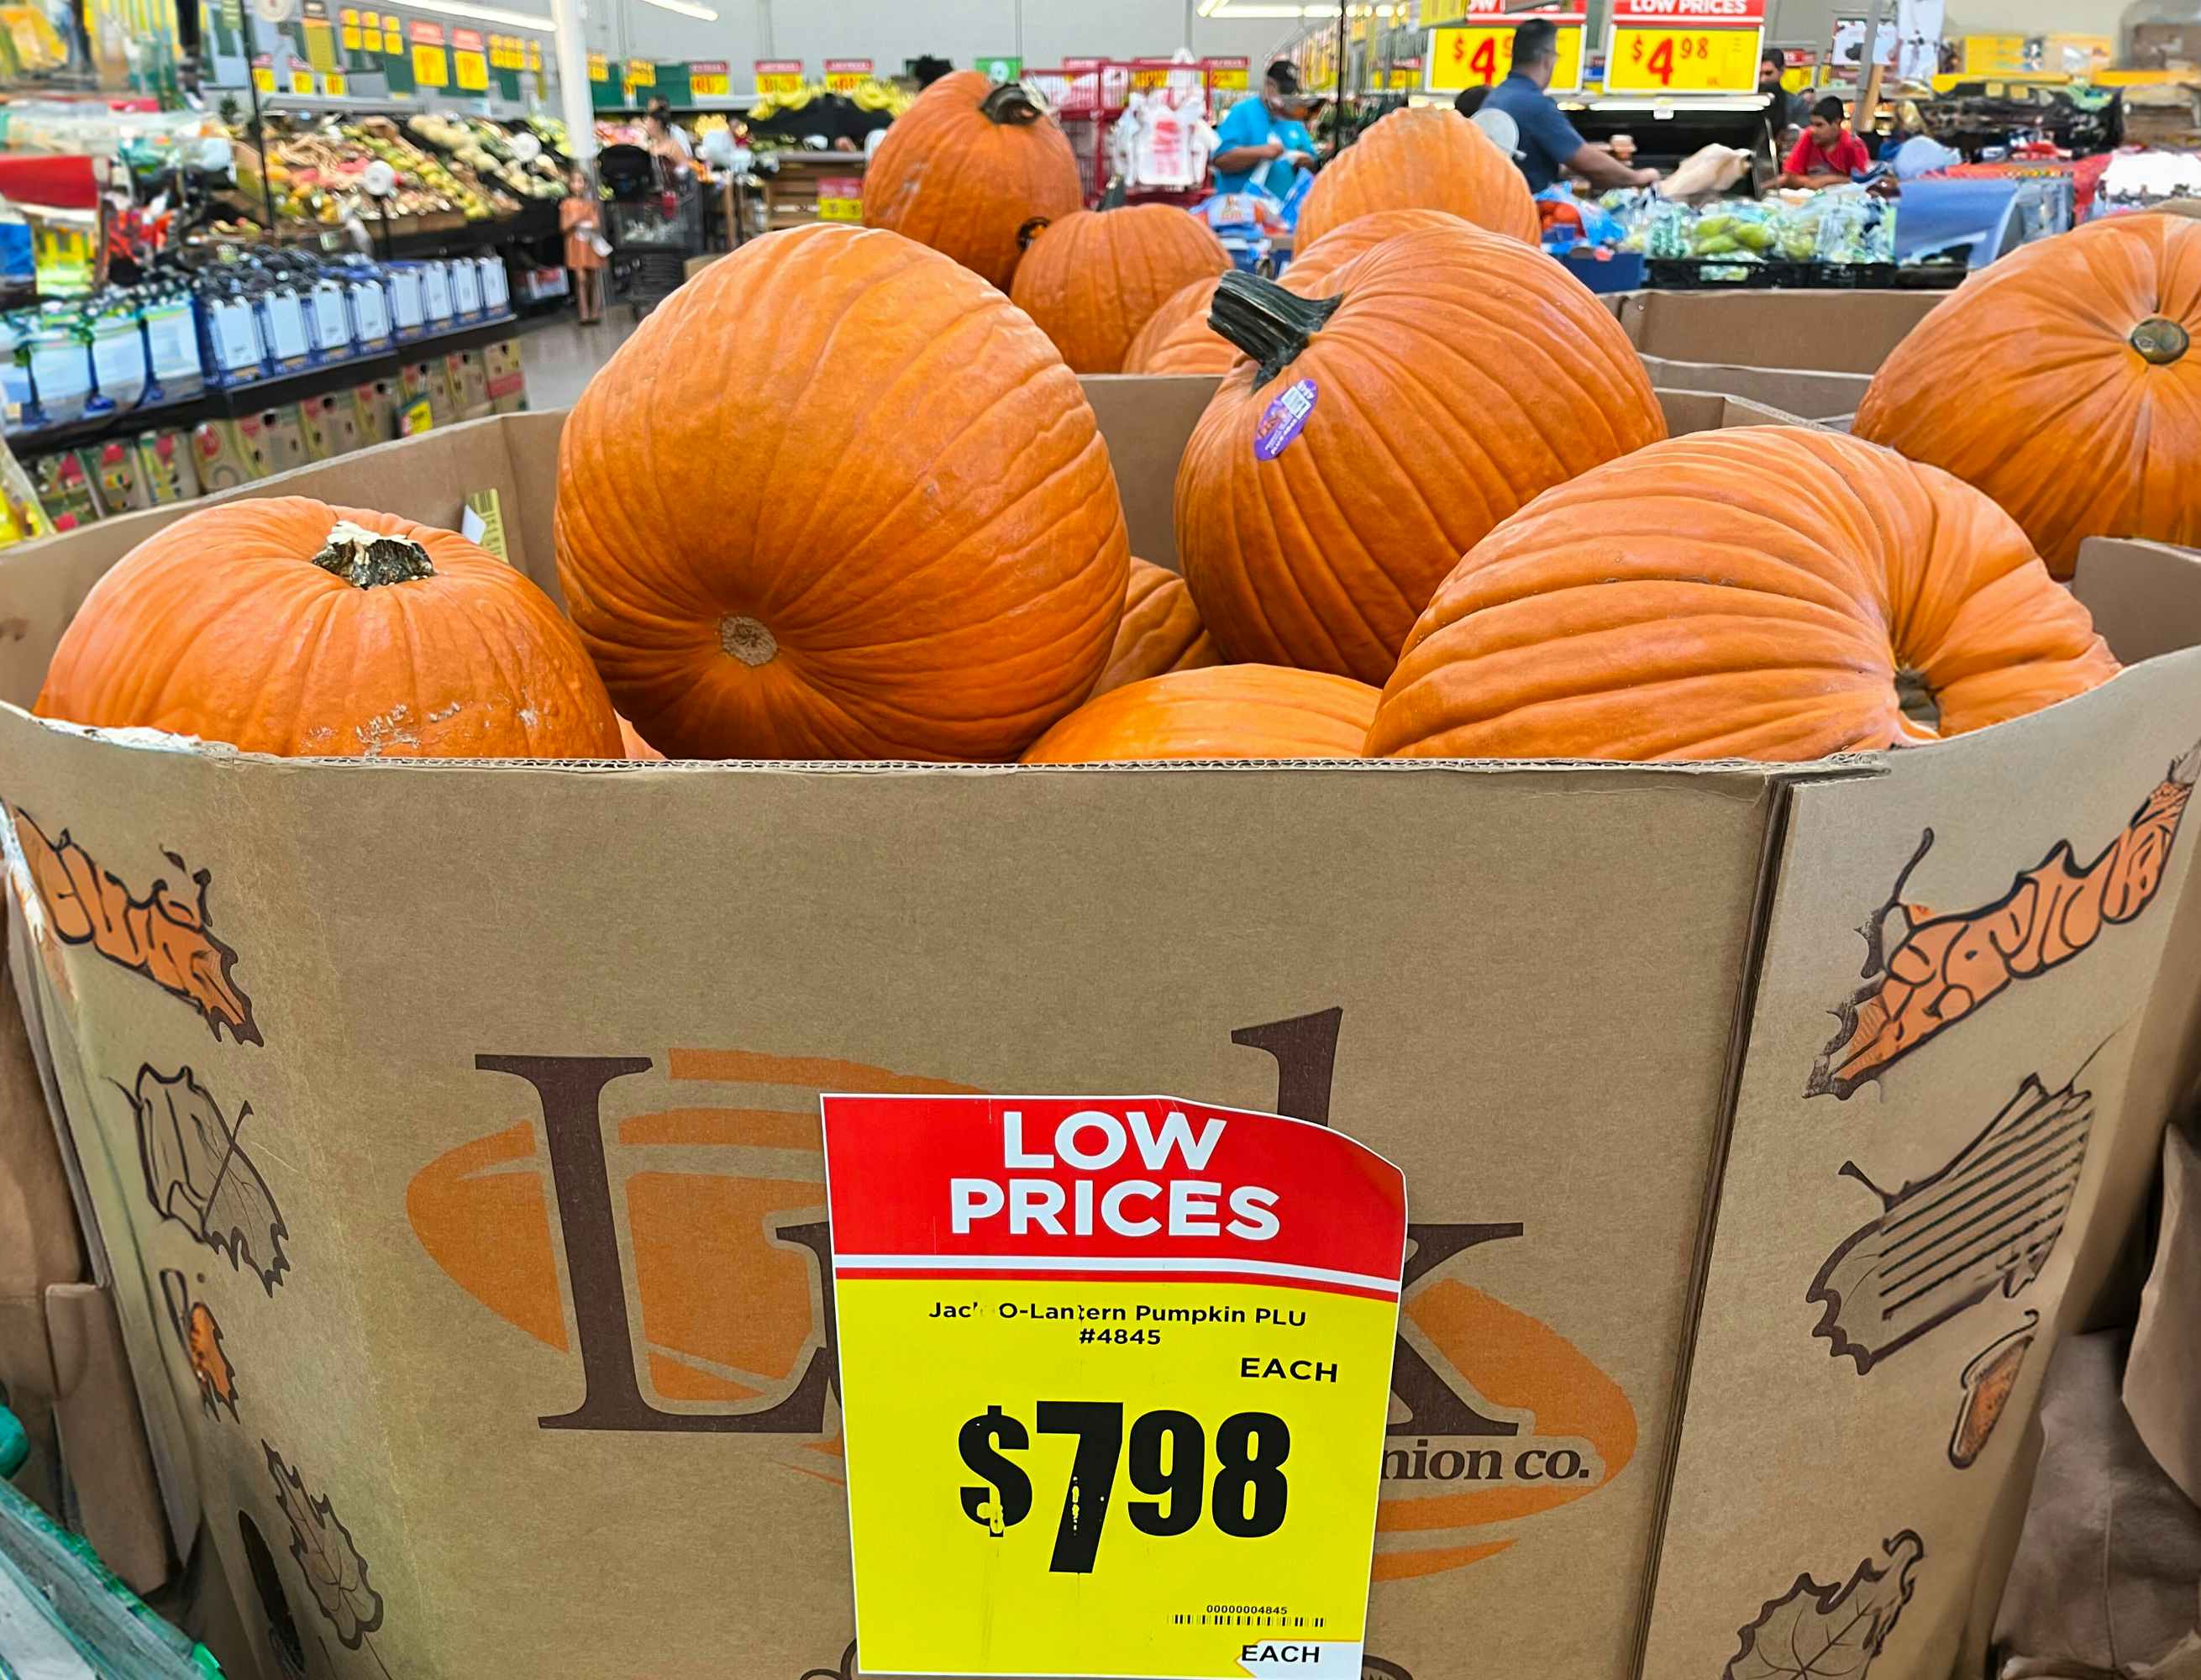 A box of pumpkins at H-E-B with the $7.99 flat rate price displayed